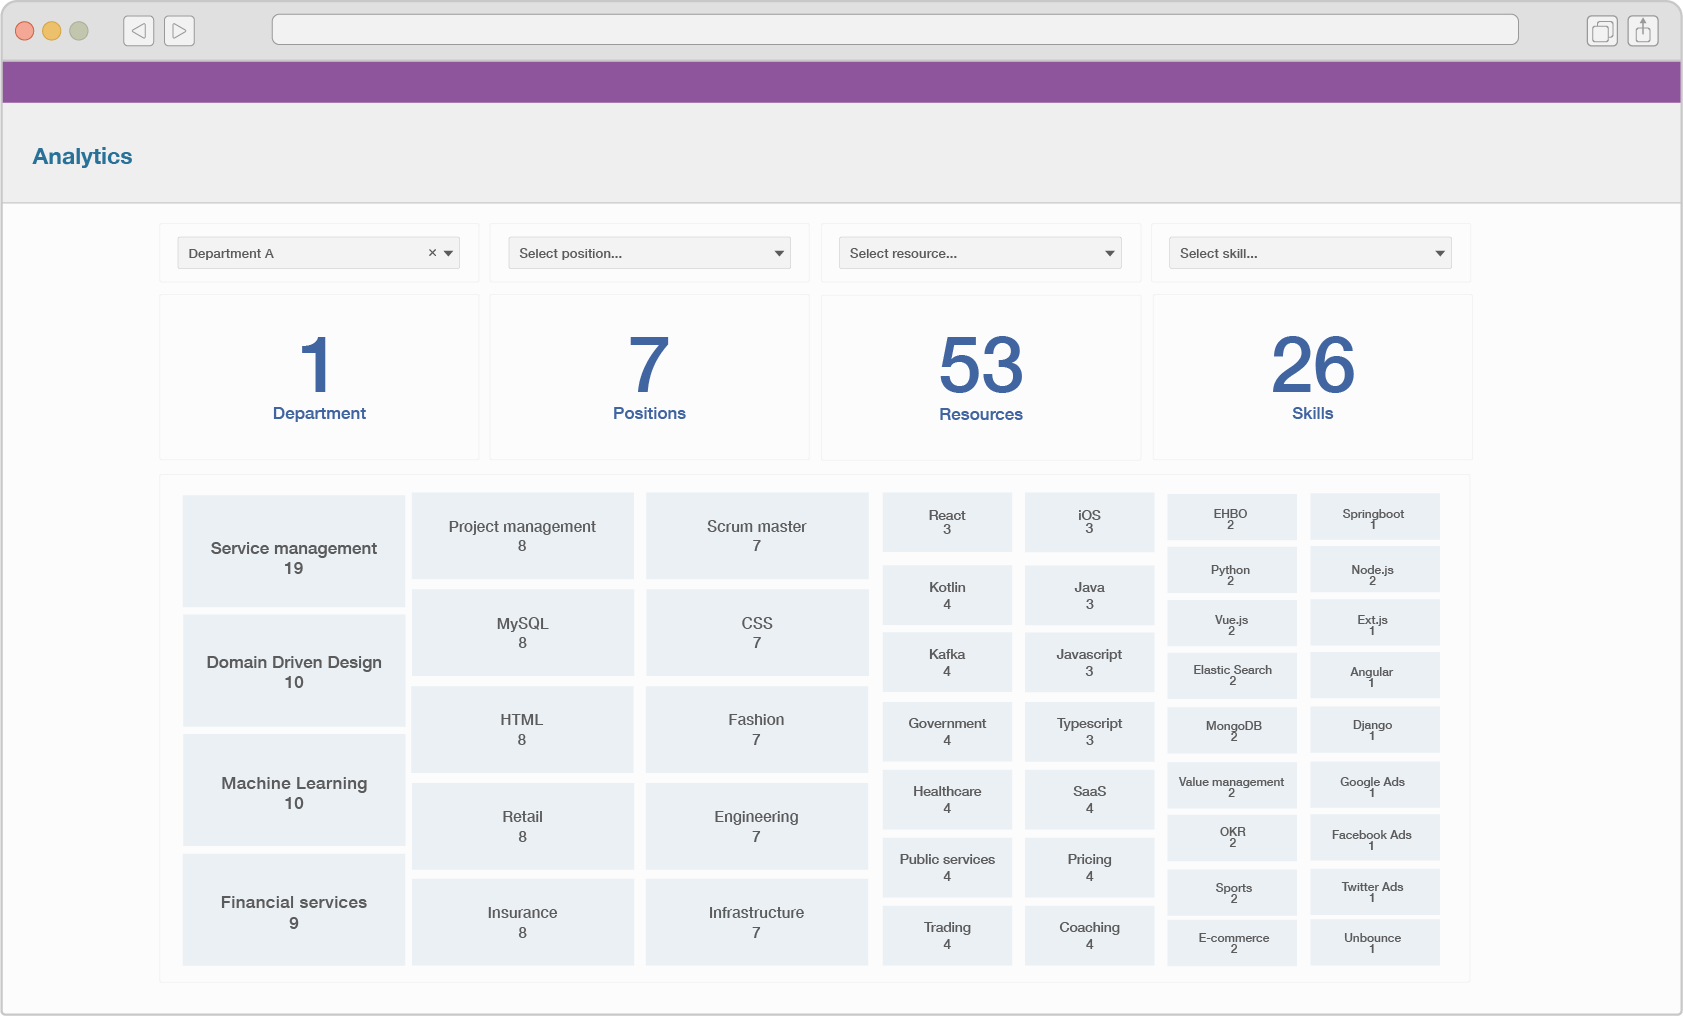 Illustration of a dashboard in the Timewax Analytics feature.